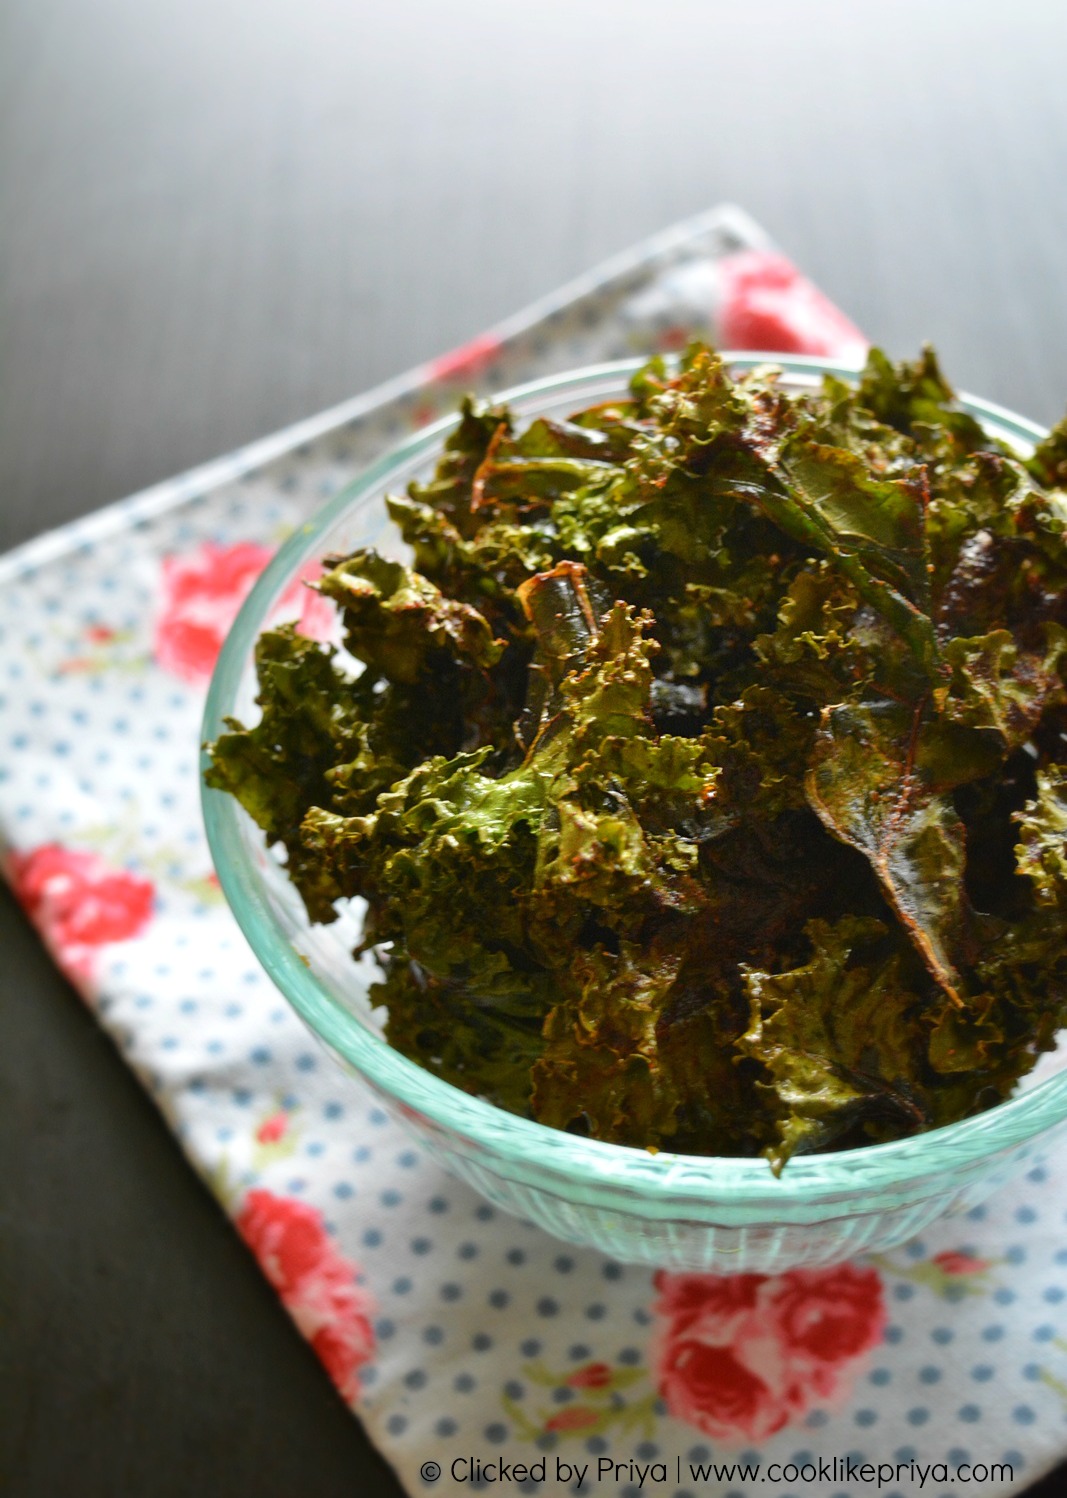 How to make Kale Chips